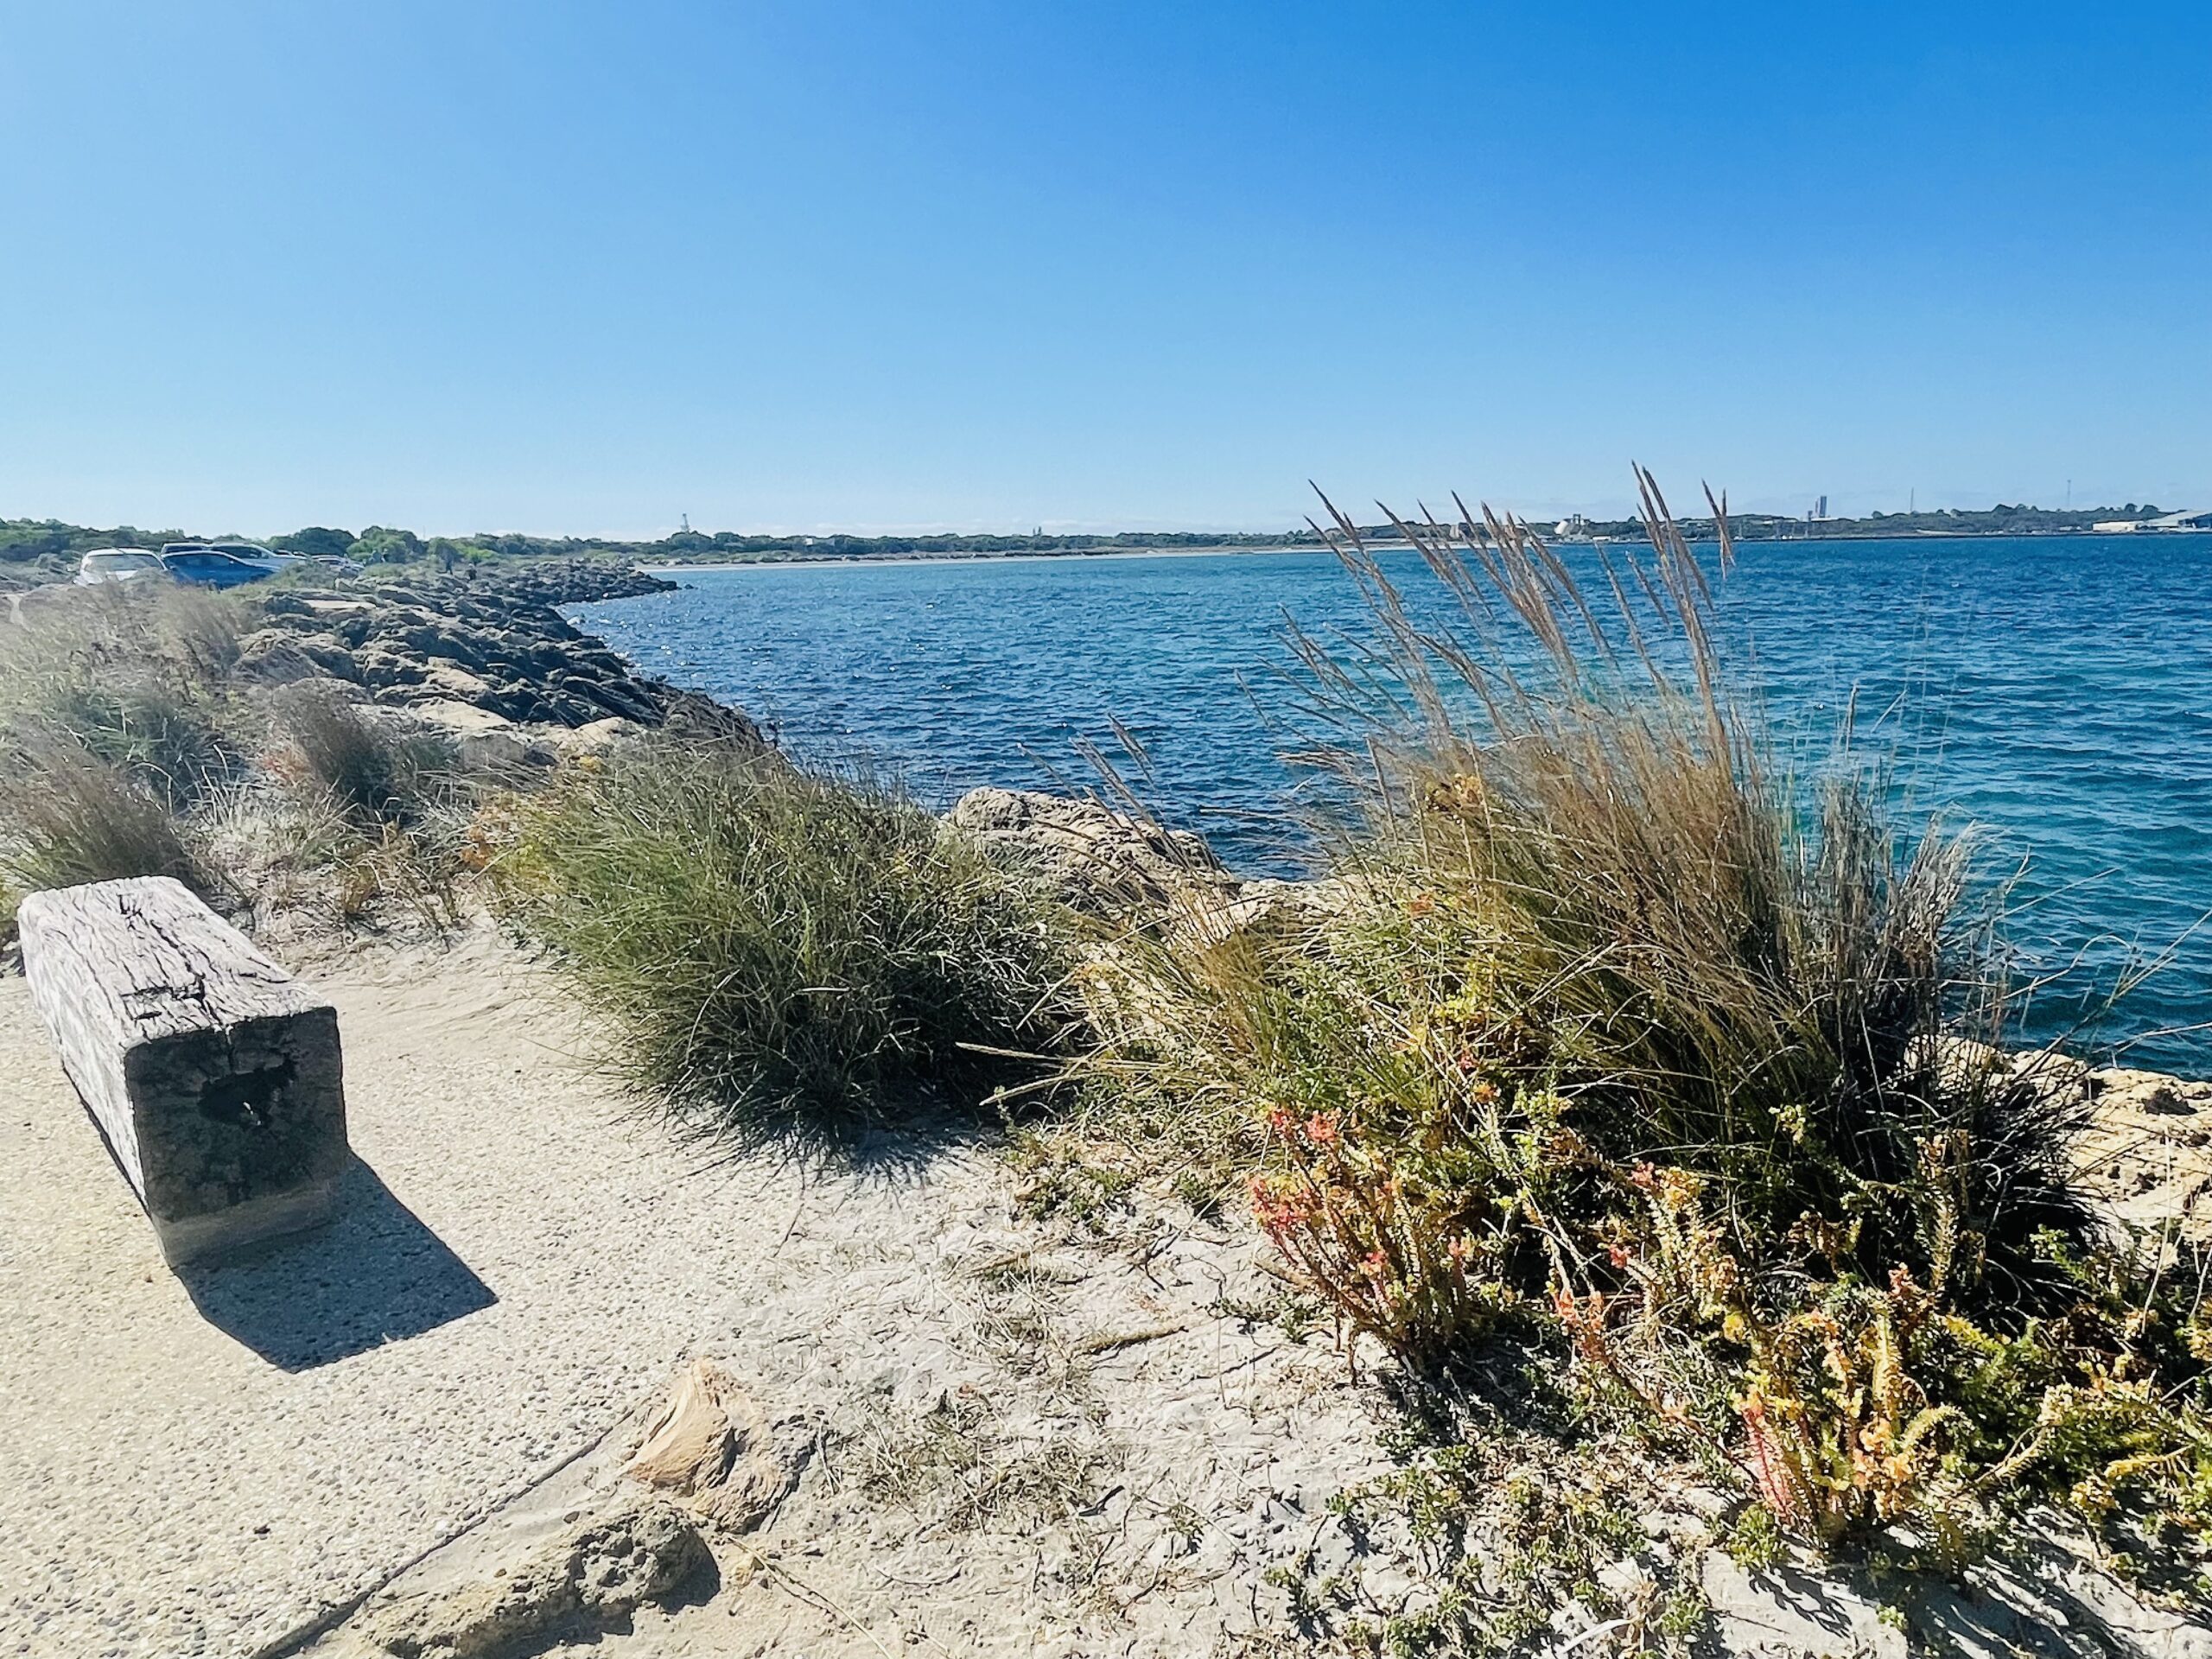 This photograph was taken of seating located in the main car park at Woodman Point Headland overlooking the ocean. The seat is a light brown wooden beam which sits on a concrete path. The shoreline is surrounded by green shrubs and rocks which overlook the dark blue ocean. The sky is blue and there are no clouds in the sky.